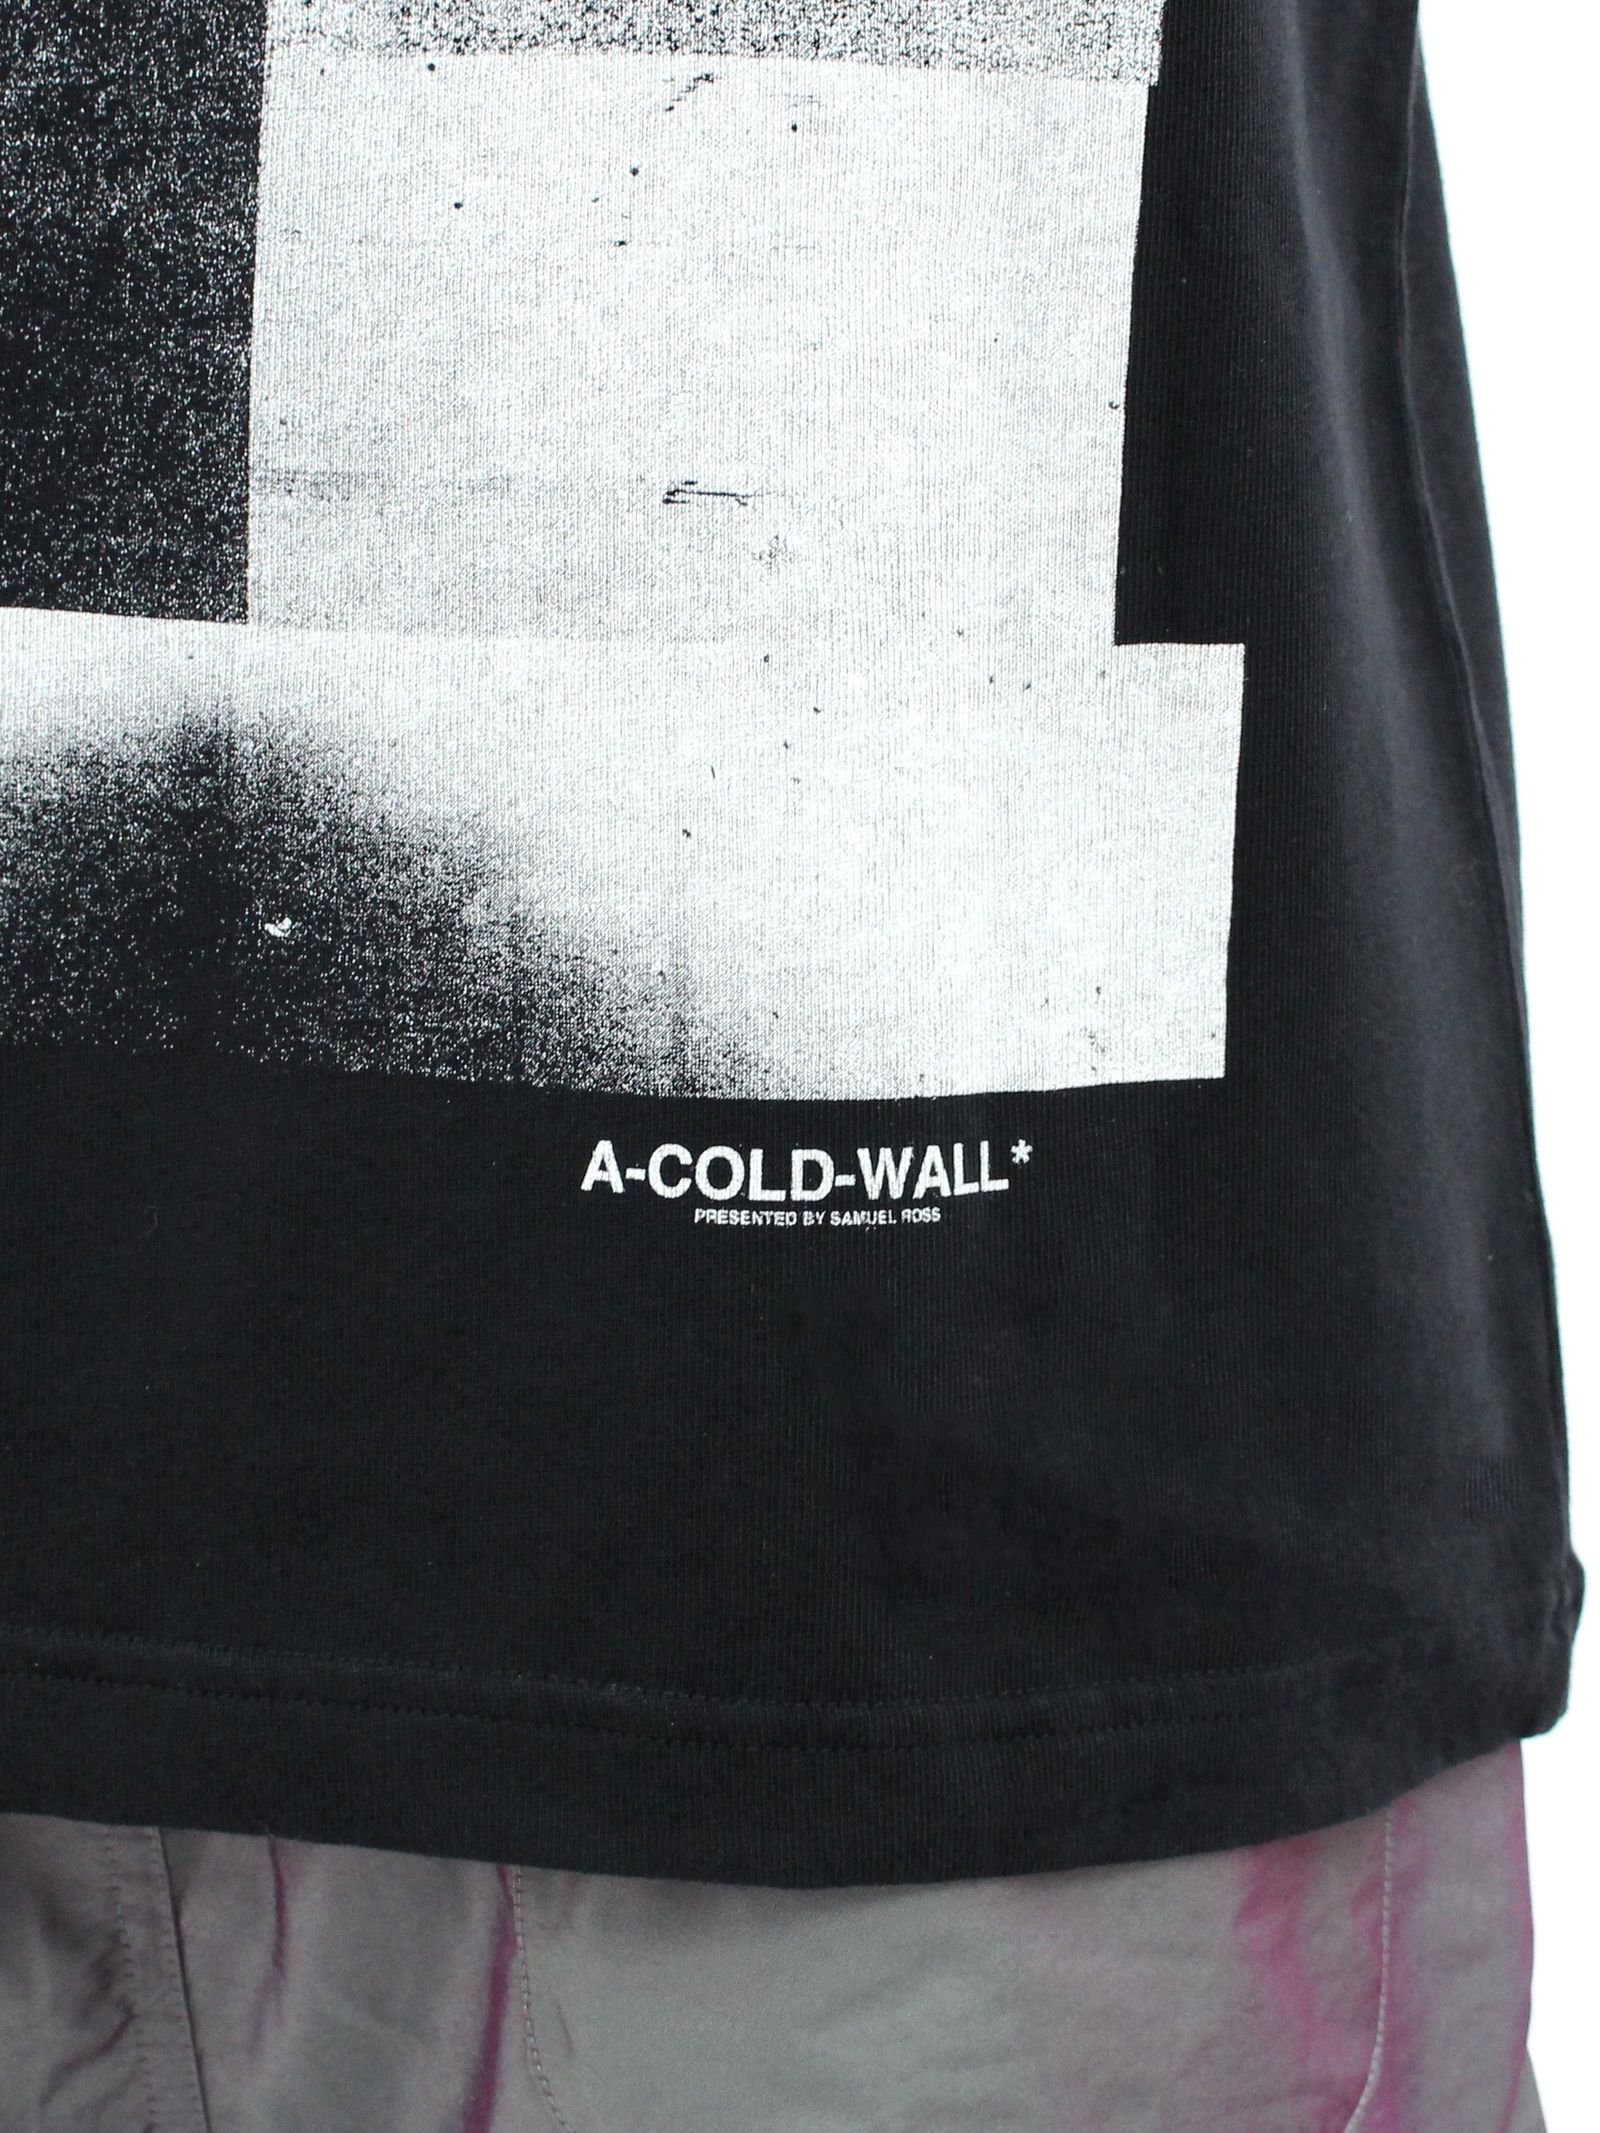 A-COLD-WALL* - バックプリント スプレー Tシャツ / ESSENTIALS